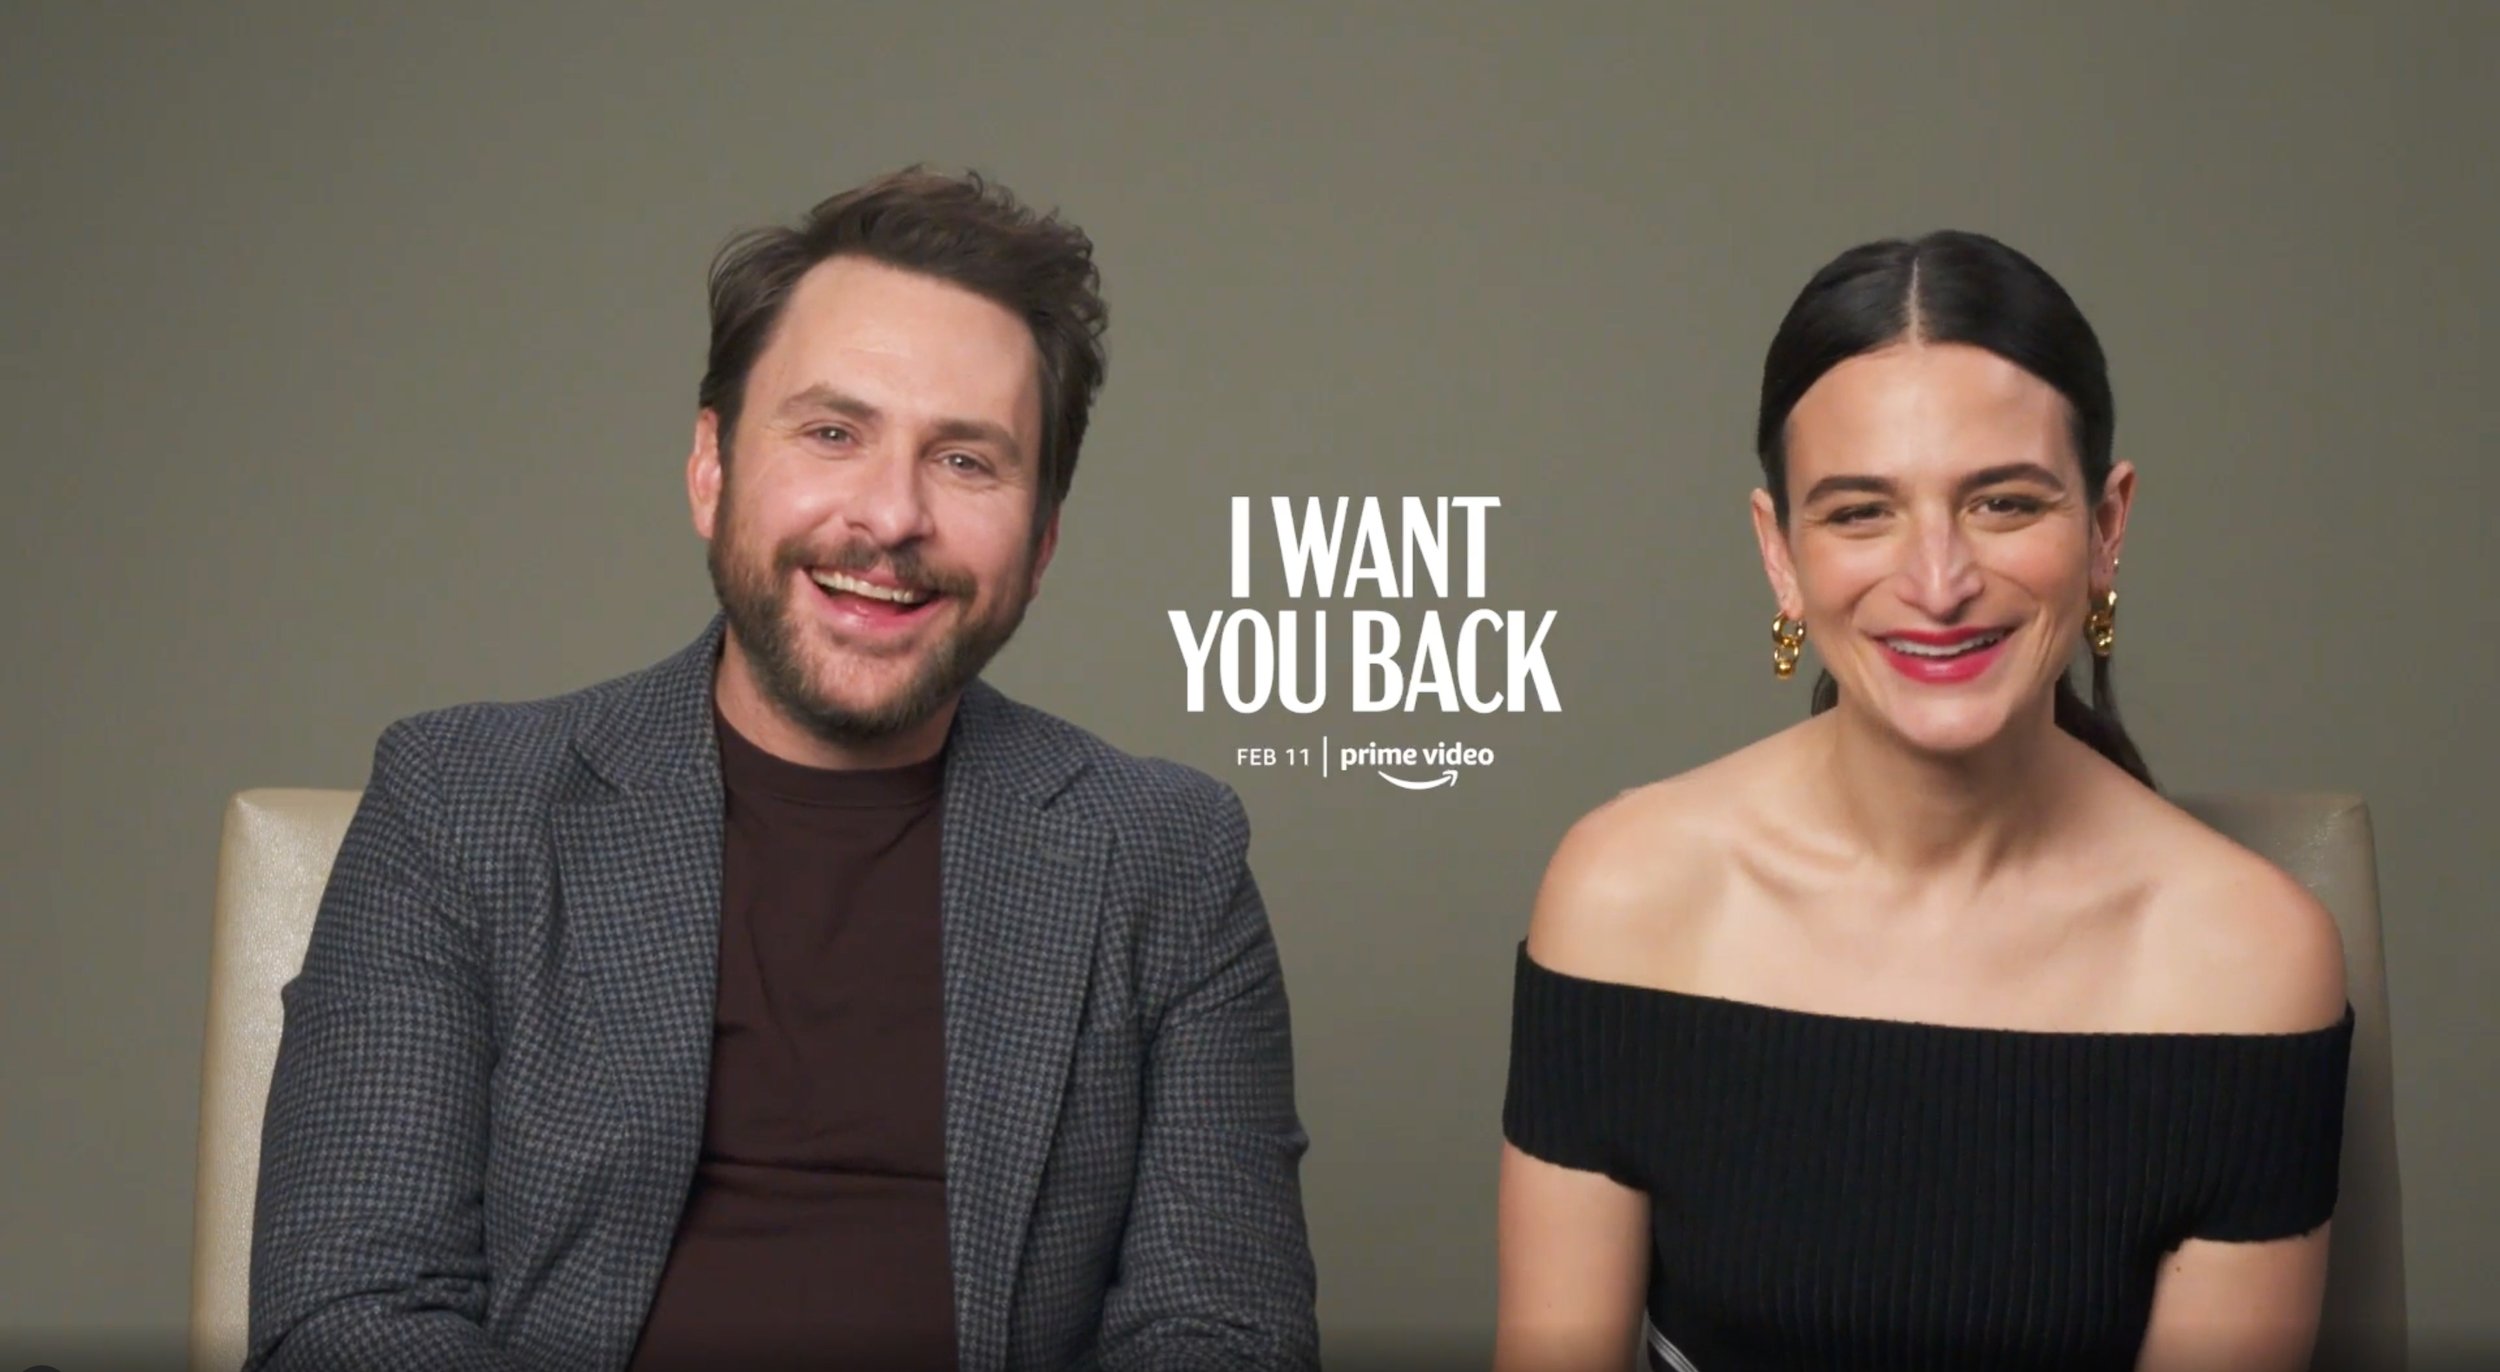 Charlie Day and Jenny Slate talk  Prime's Romantic Comedy 'I Want You  Back' —